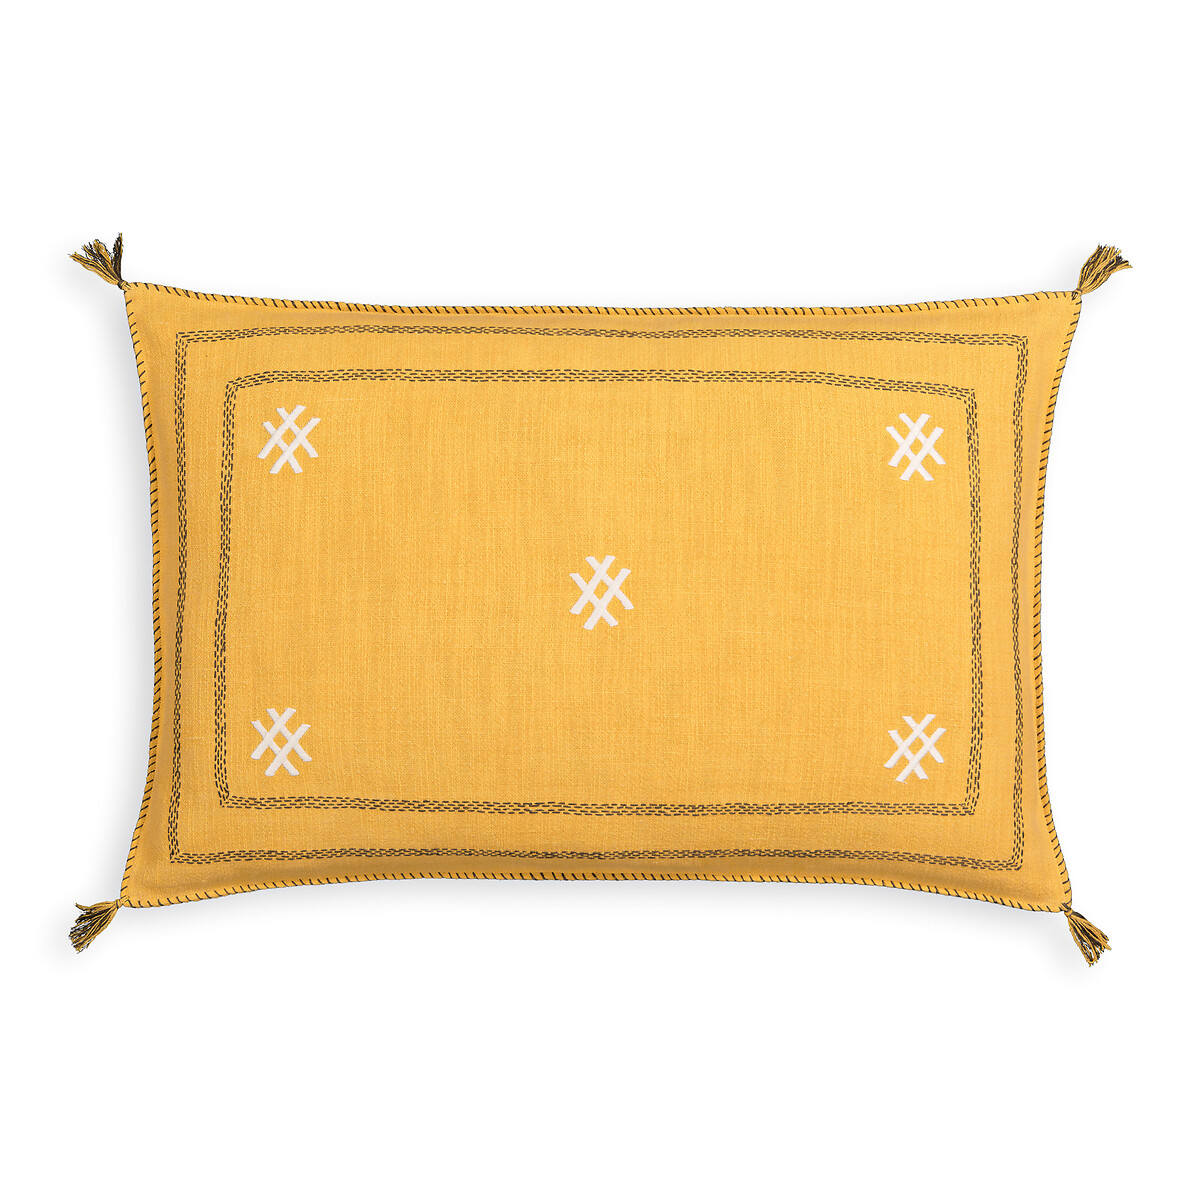 Chad Embroidered Linen and Cotton Blend Cushion Cover